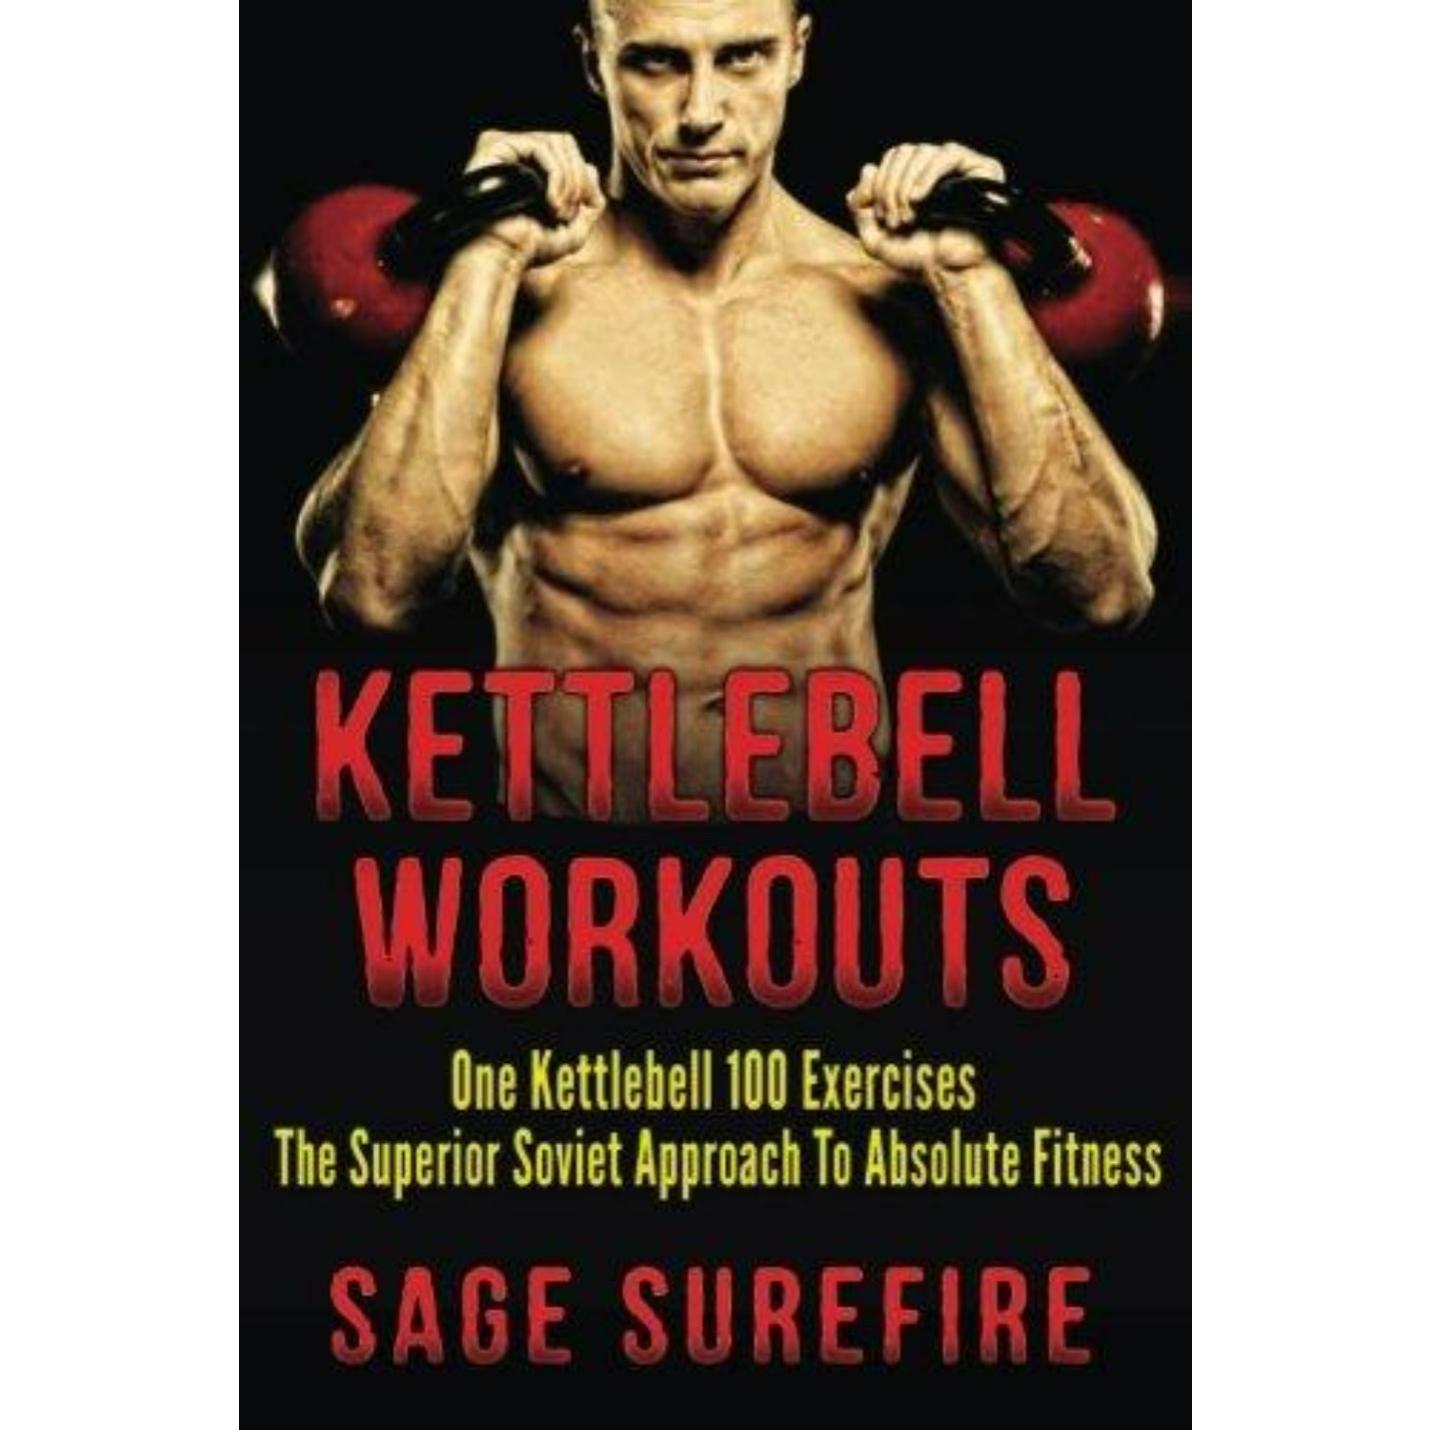 Kettlebell Workouts: One Kettlebell 100 Exercises - The Superior Soviet Approach To Absolute Fitness; Kettlebell Workouts And Kettlebell Training - happygetfit.com